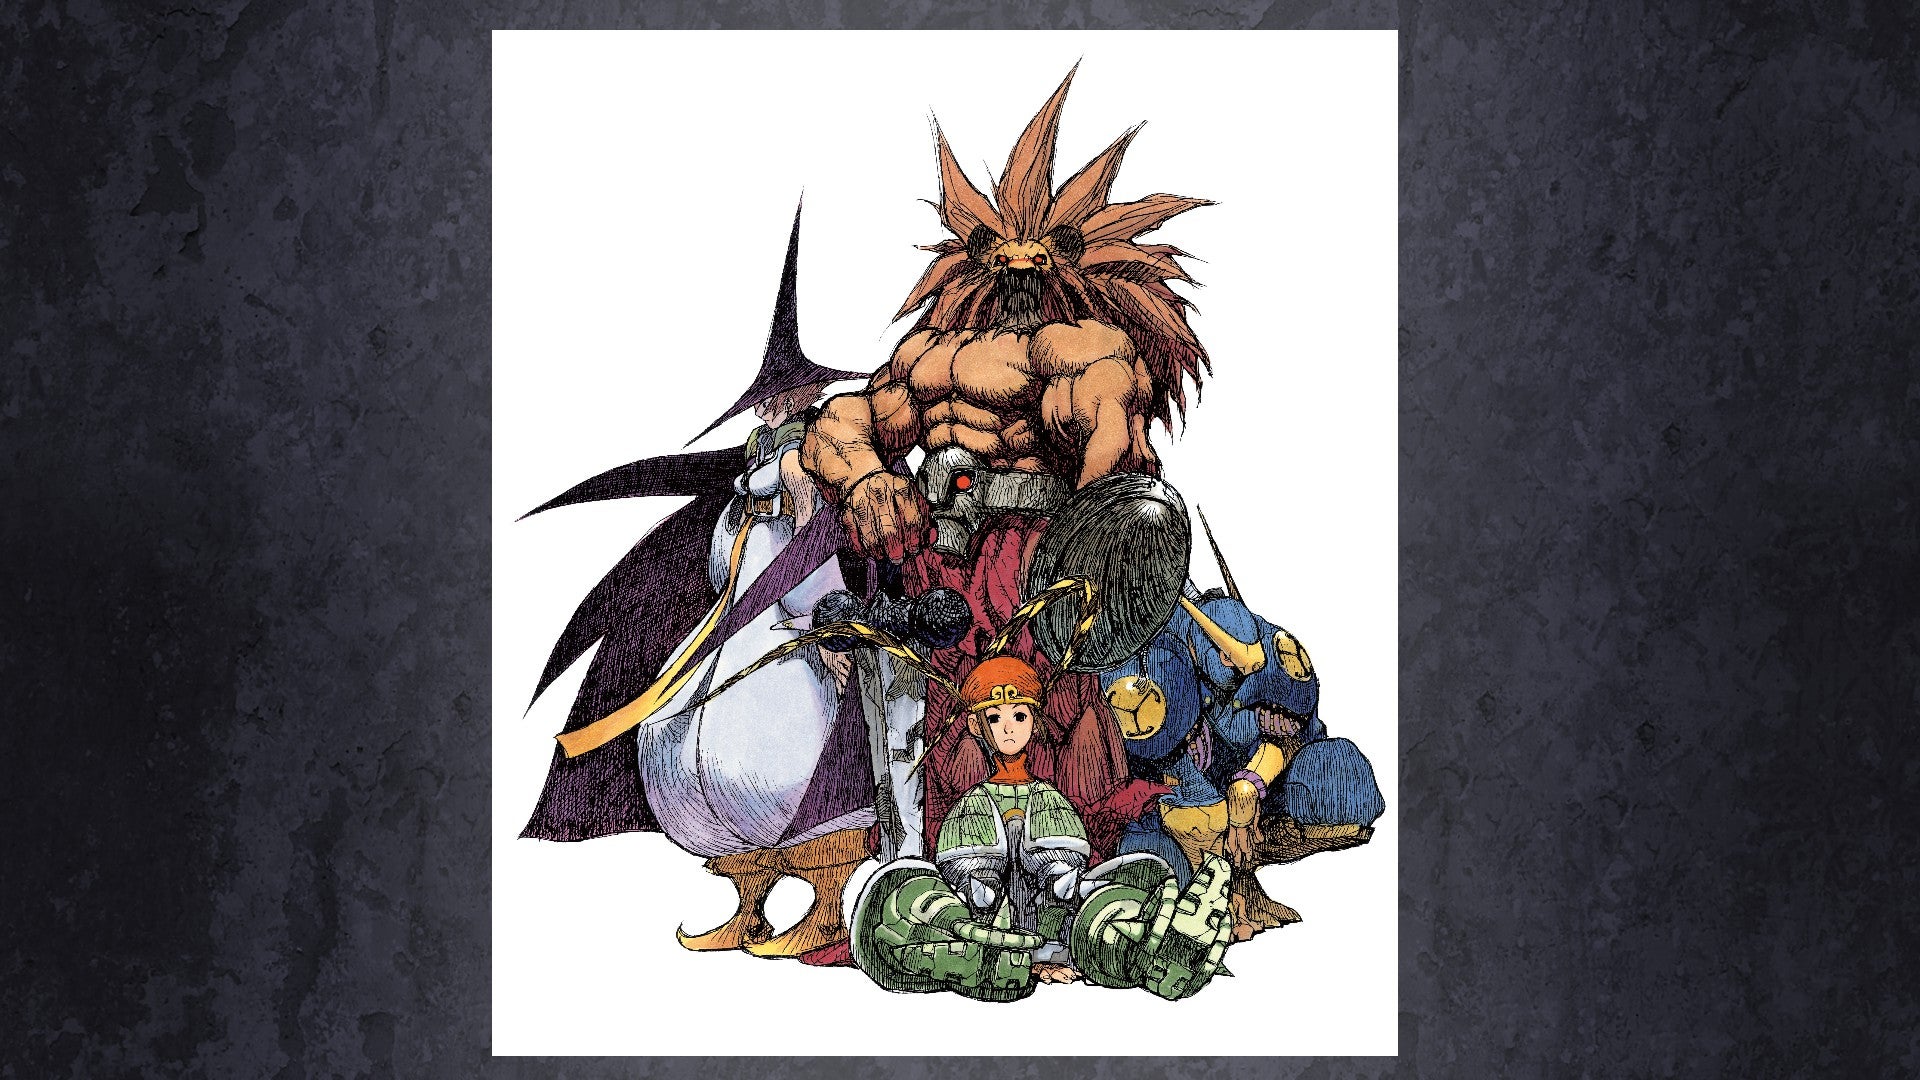 One of the art pieces from the Museum in the Capcom Fighting Collection